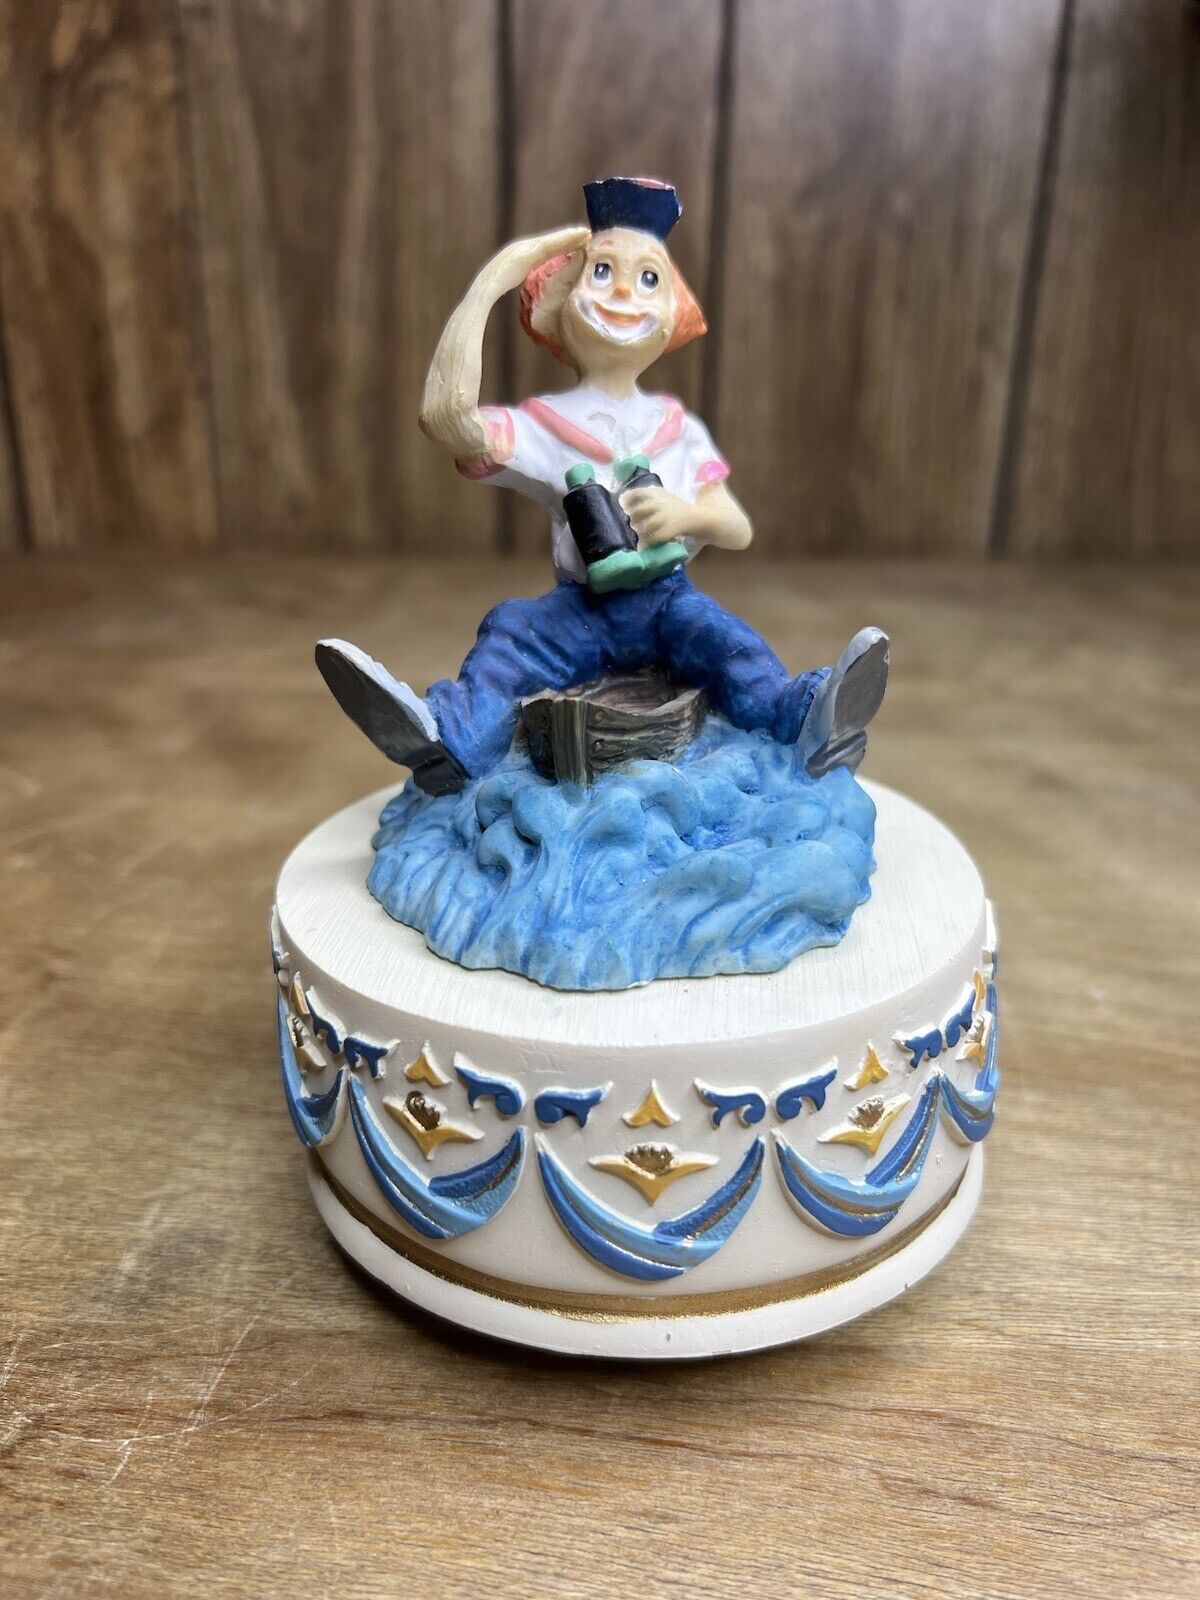 Vintage Music Box Sailor Clown on Boat Lost at Sea.. it Spins around- Plays Song